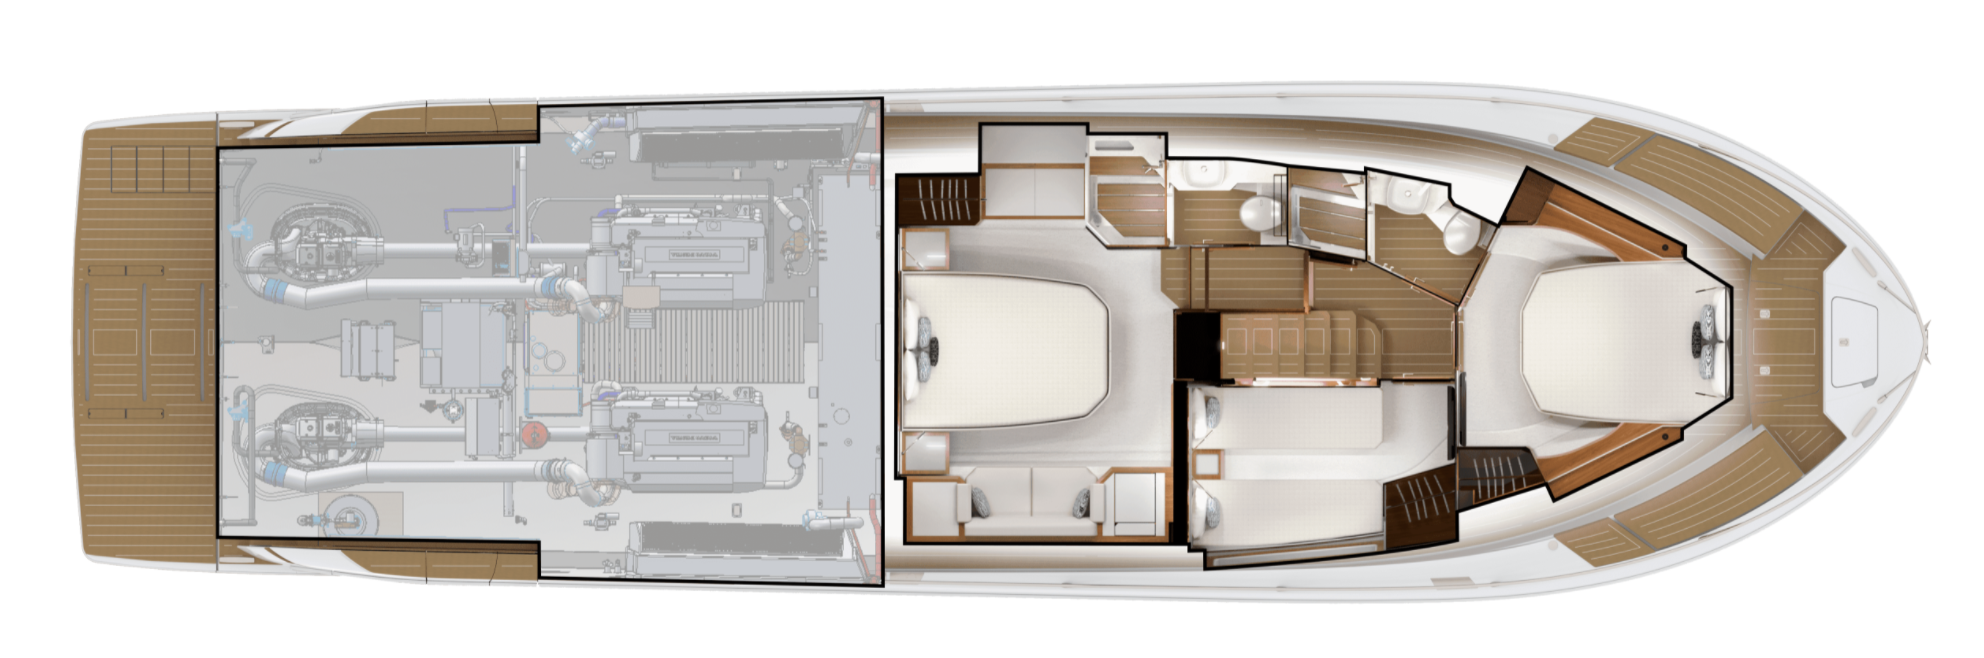 Tiara EX 60 accommodations deck, accommodations plan, drawing